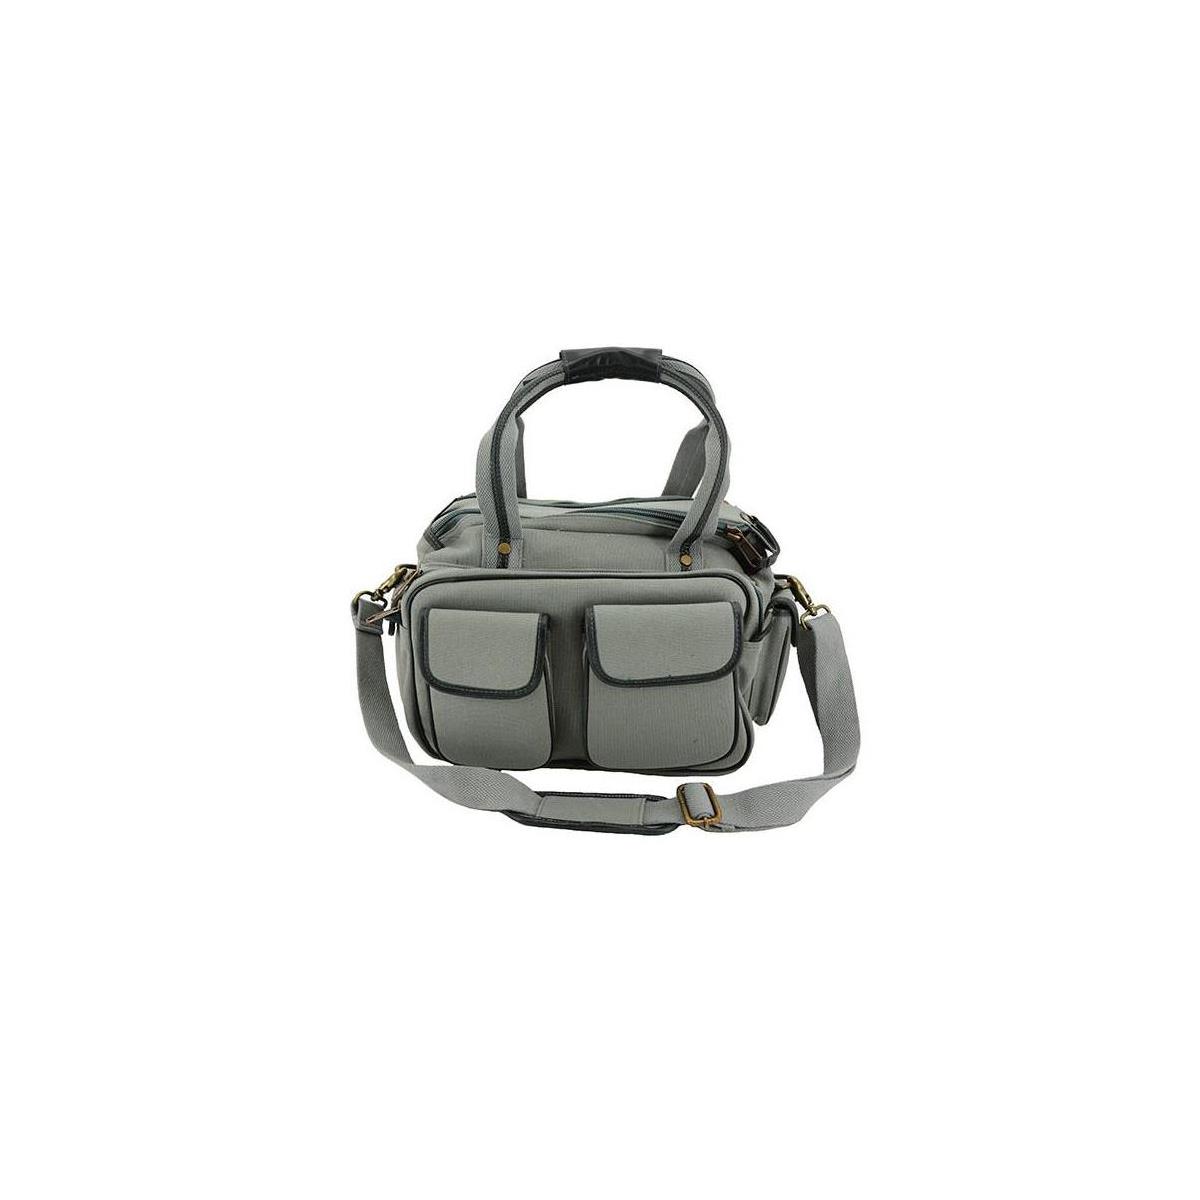 Image of Cameleon Gettysburg Large Range Bag with Concealed Carry Compartment